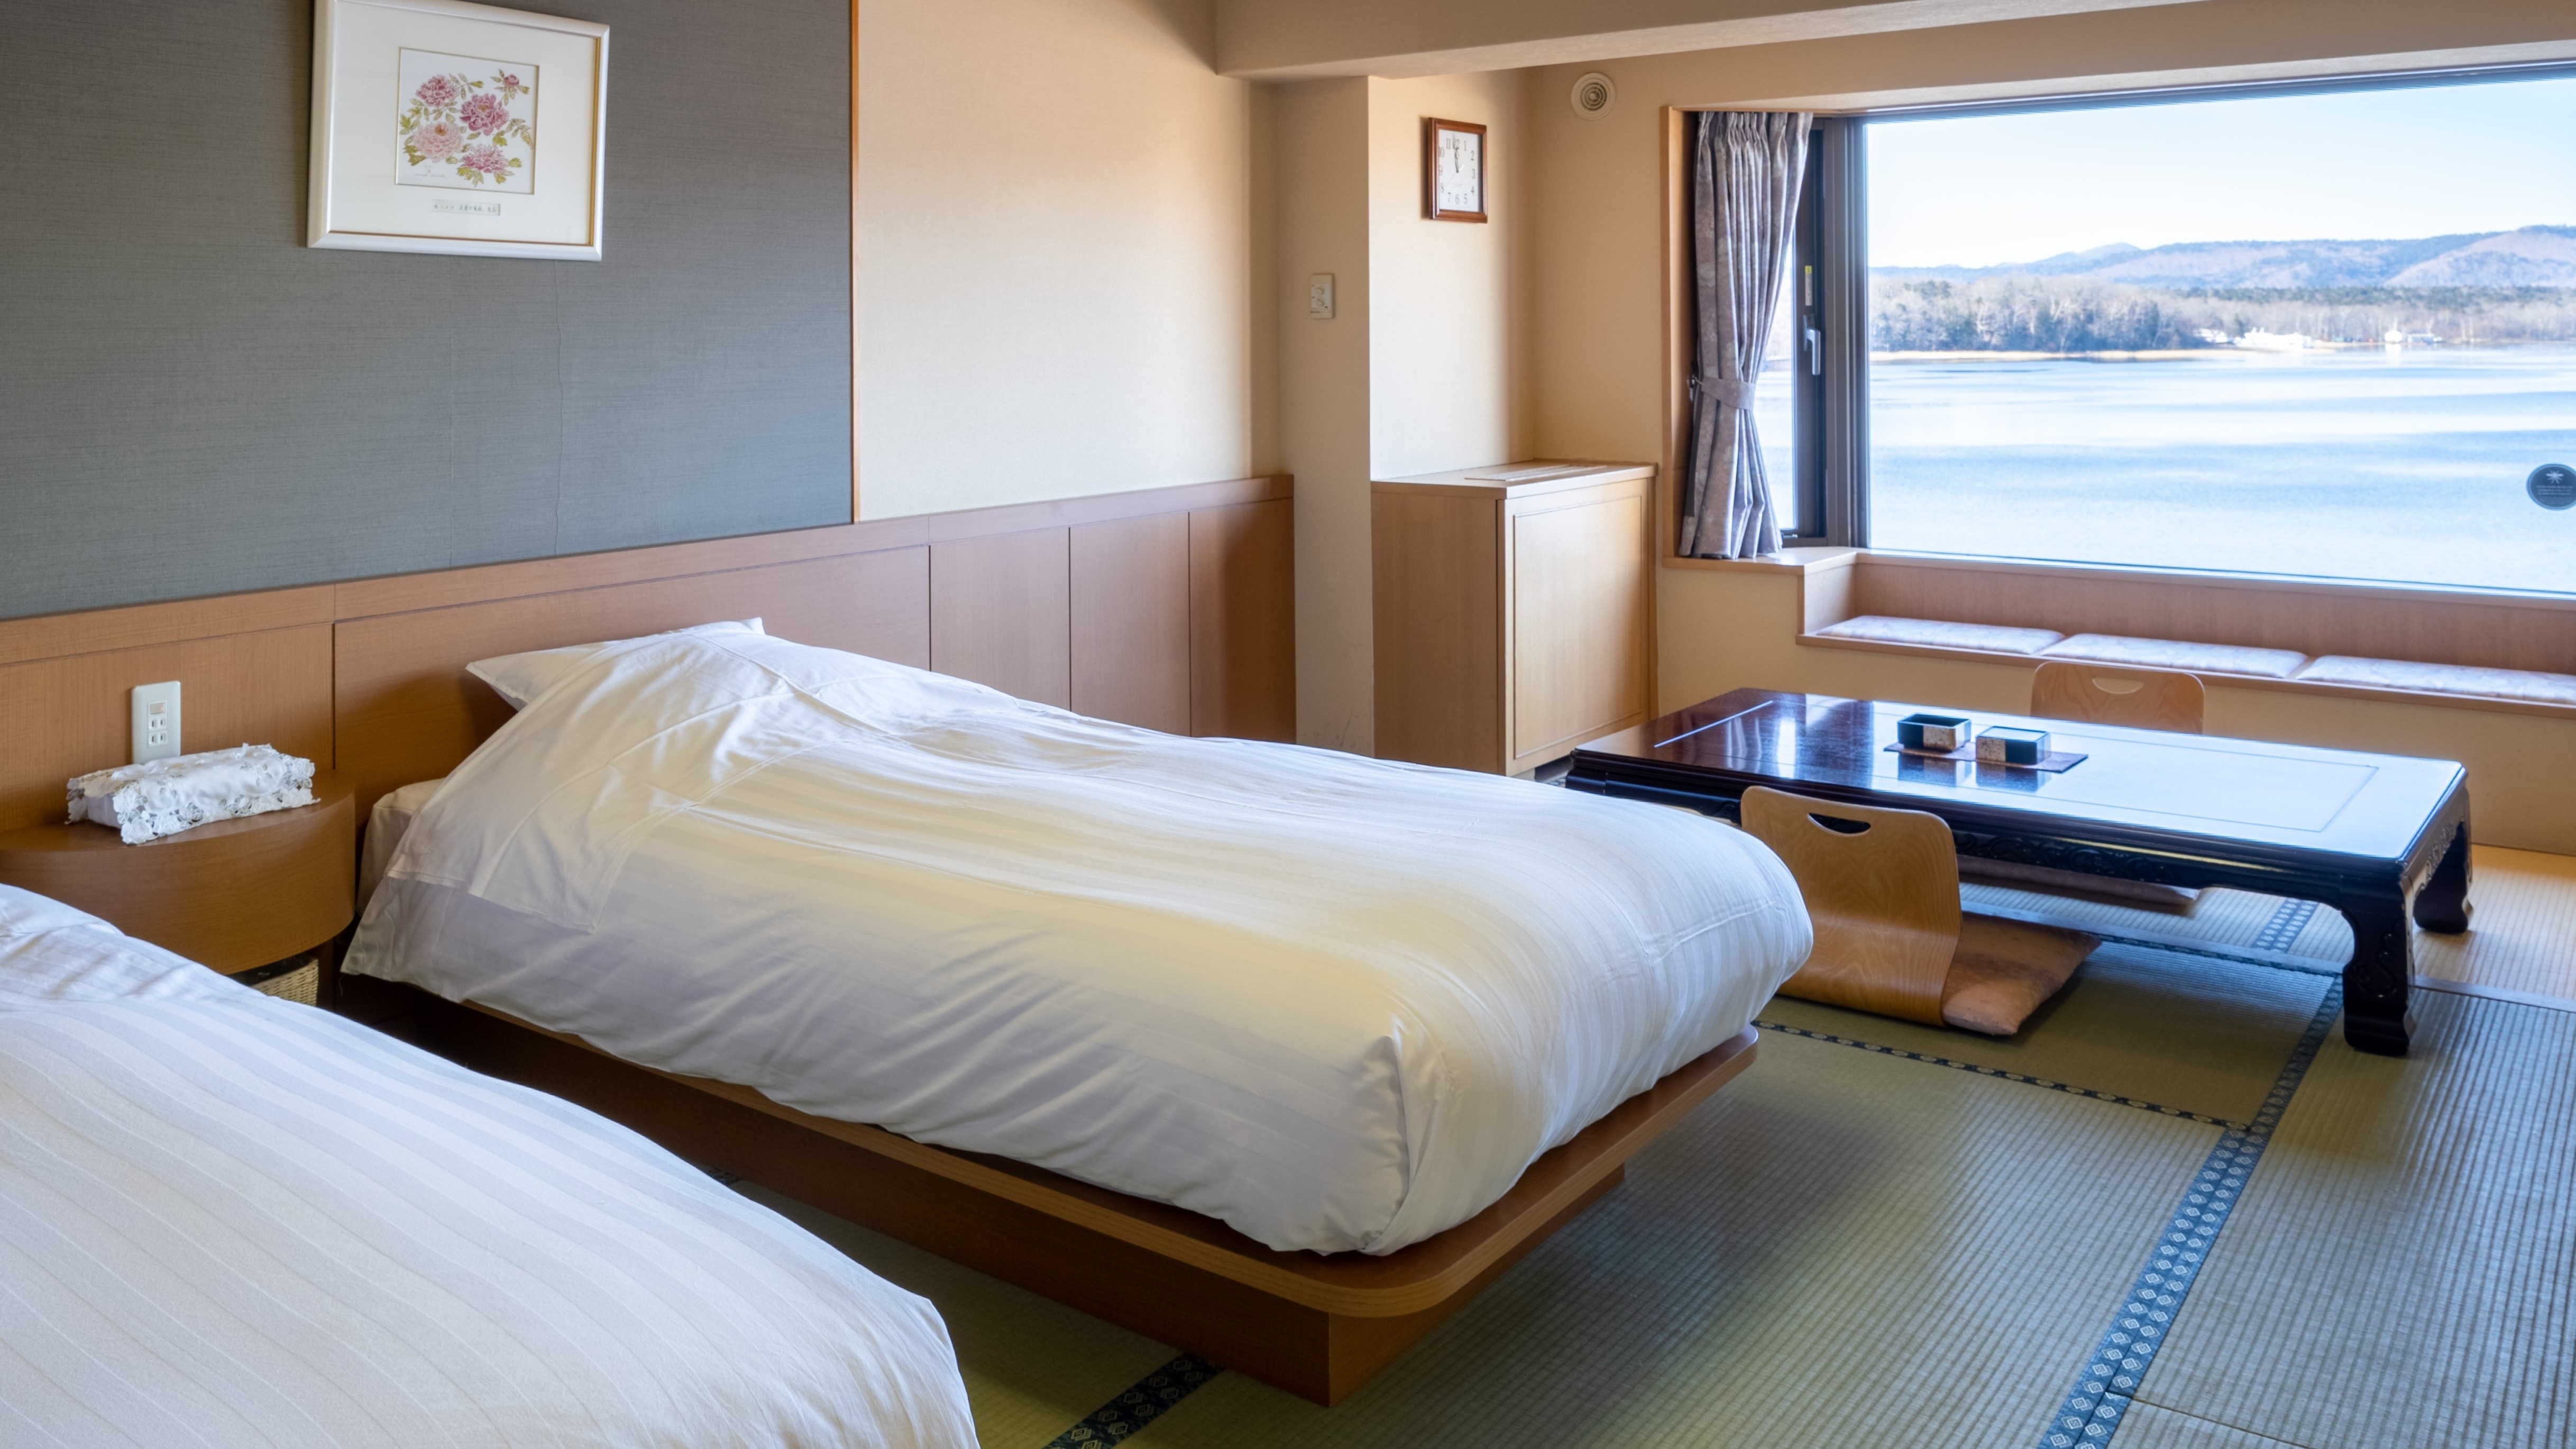 [Lake side] Japanese-style twin / Japanese-style room with a bed and a feeling of openness overlooking the lake.